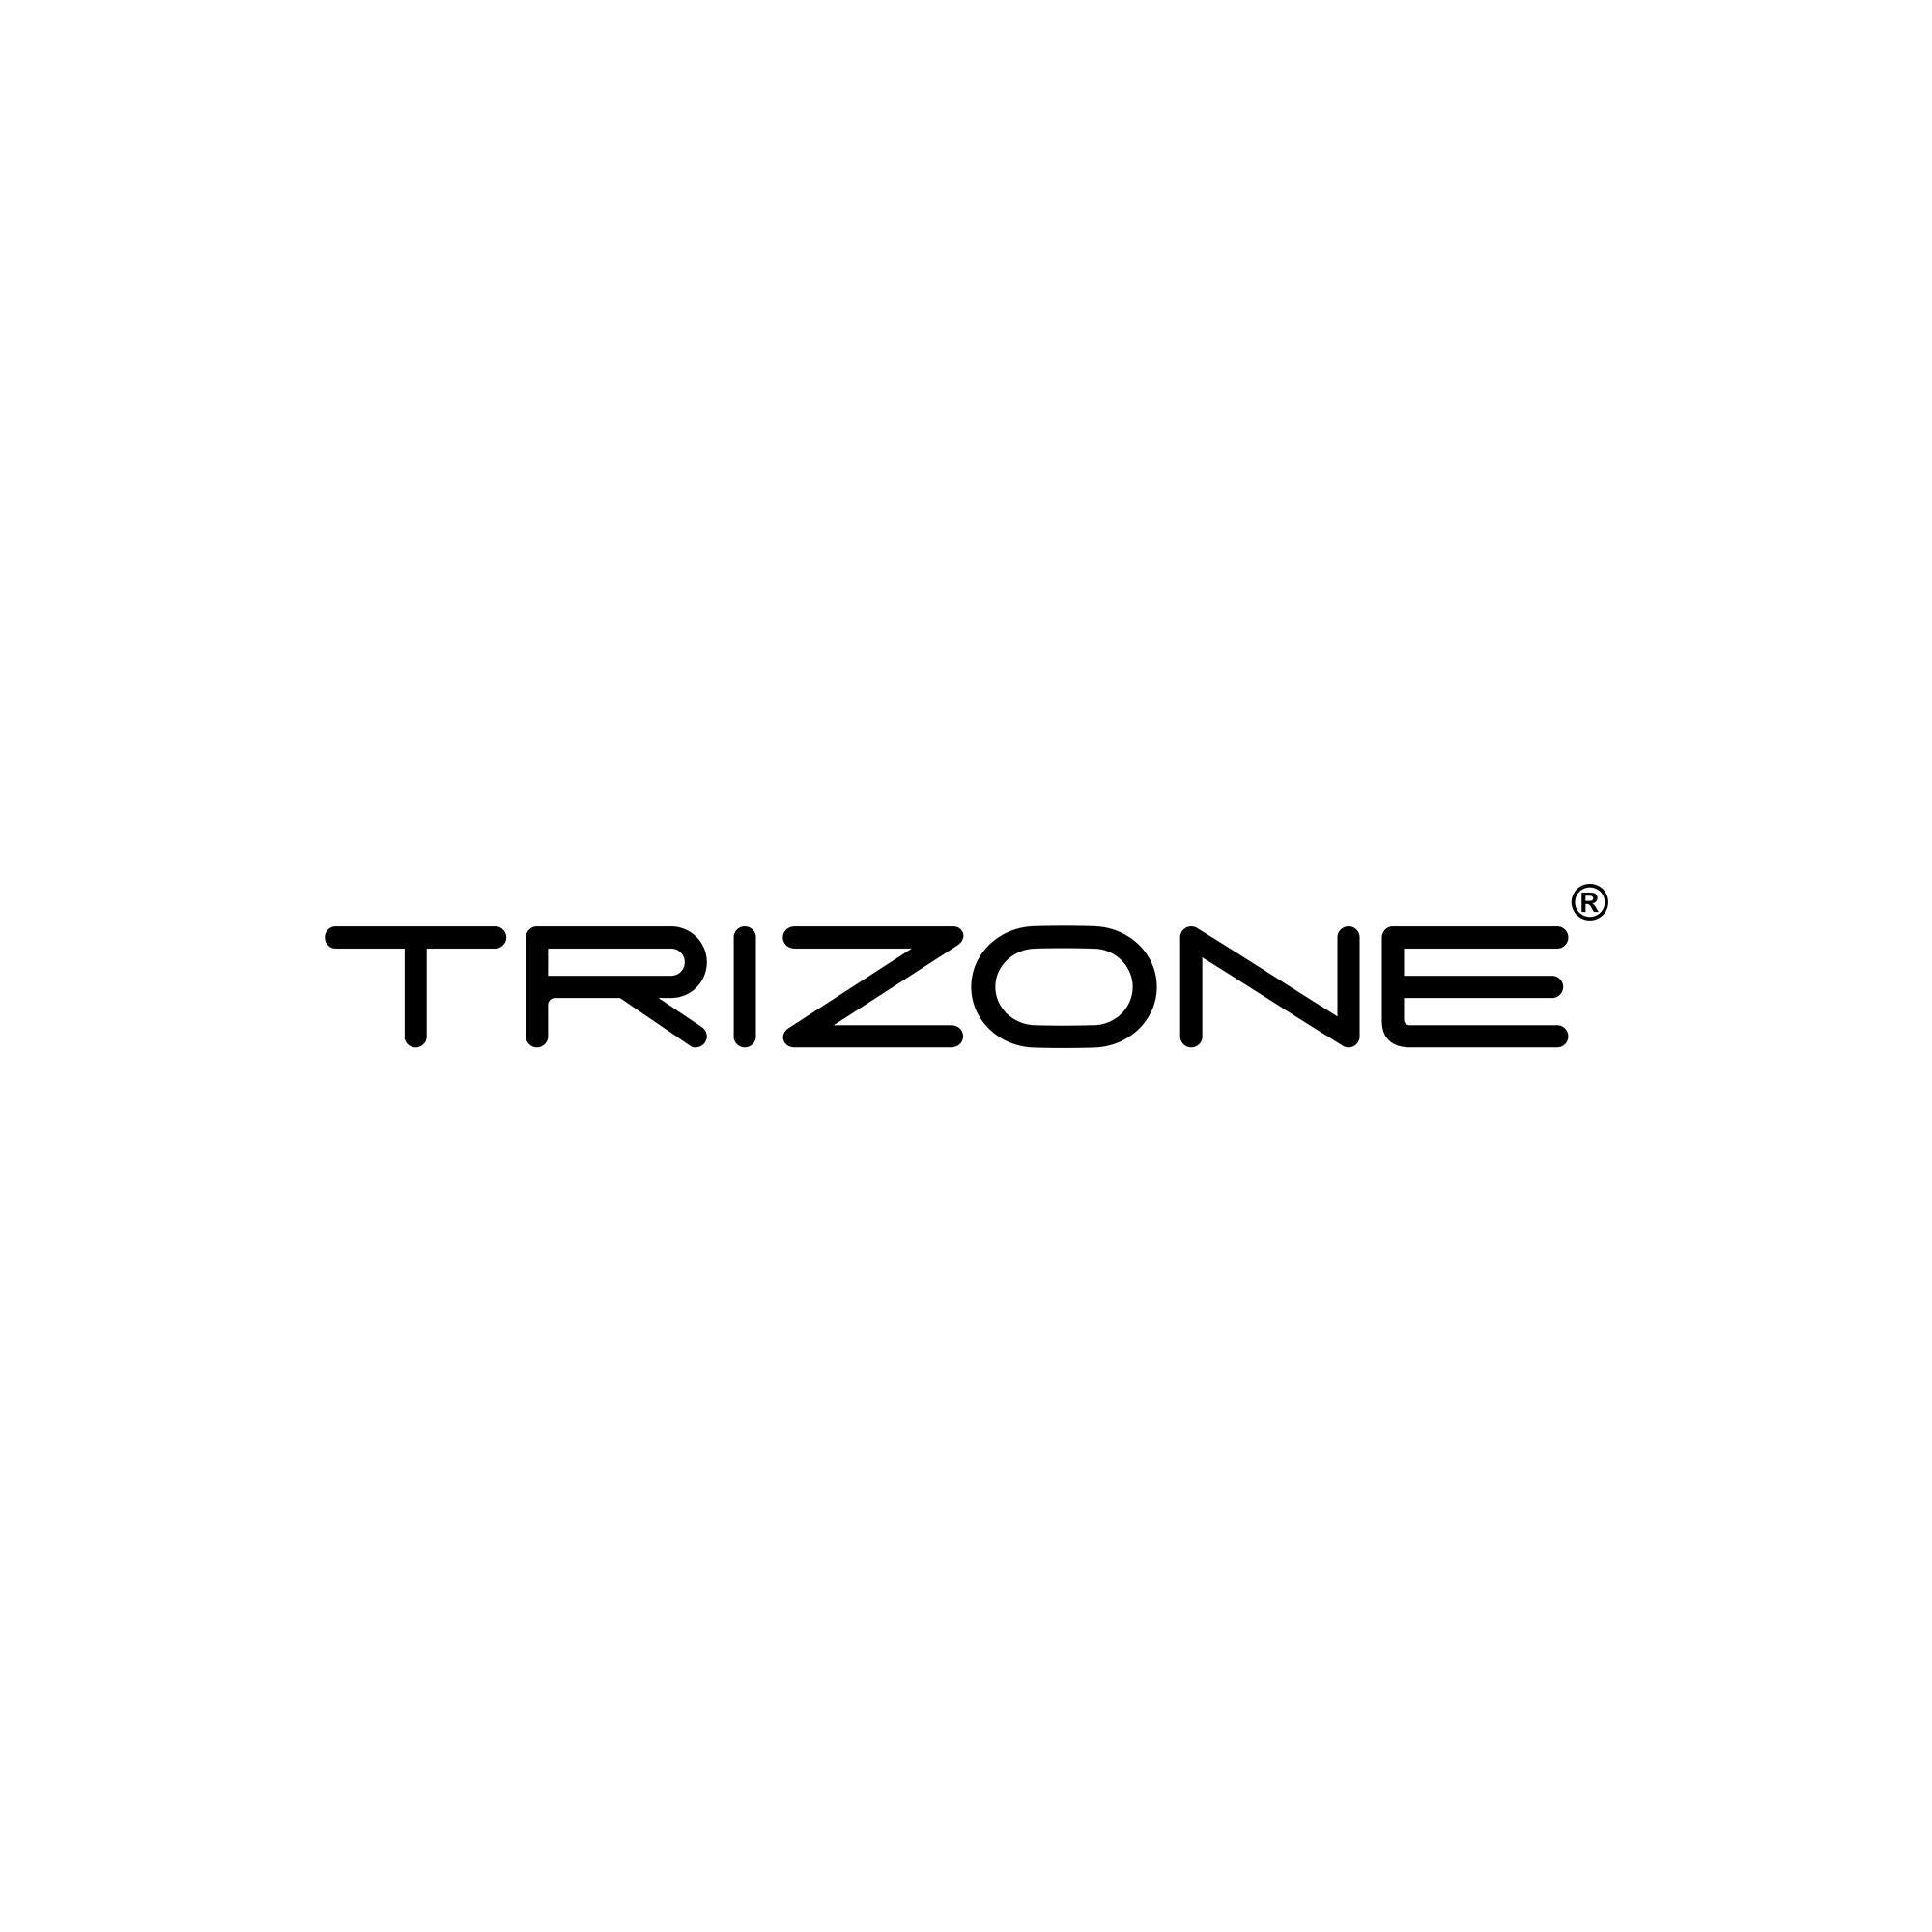 Trizone India - Advertising and Branding Agency in Vadodara|Architect|Professional Services